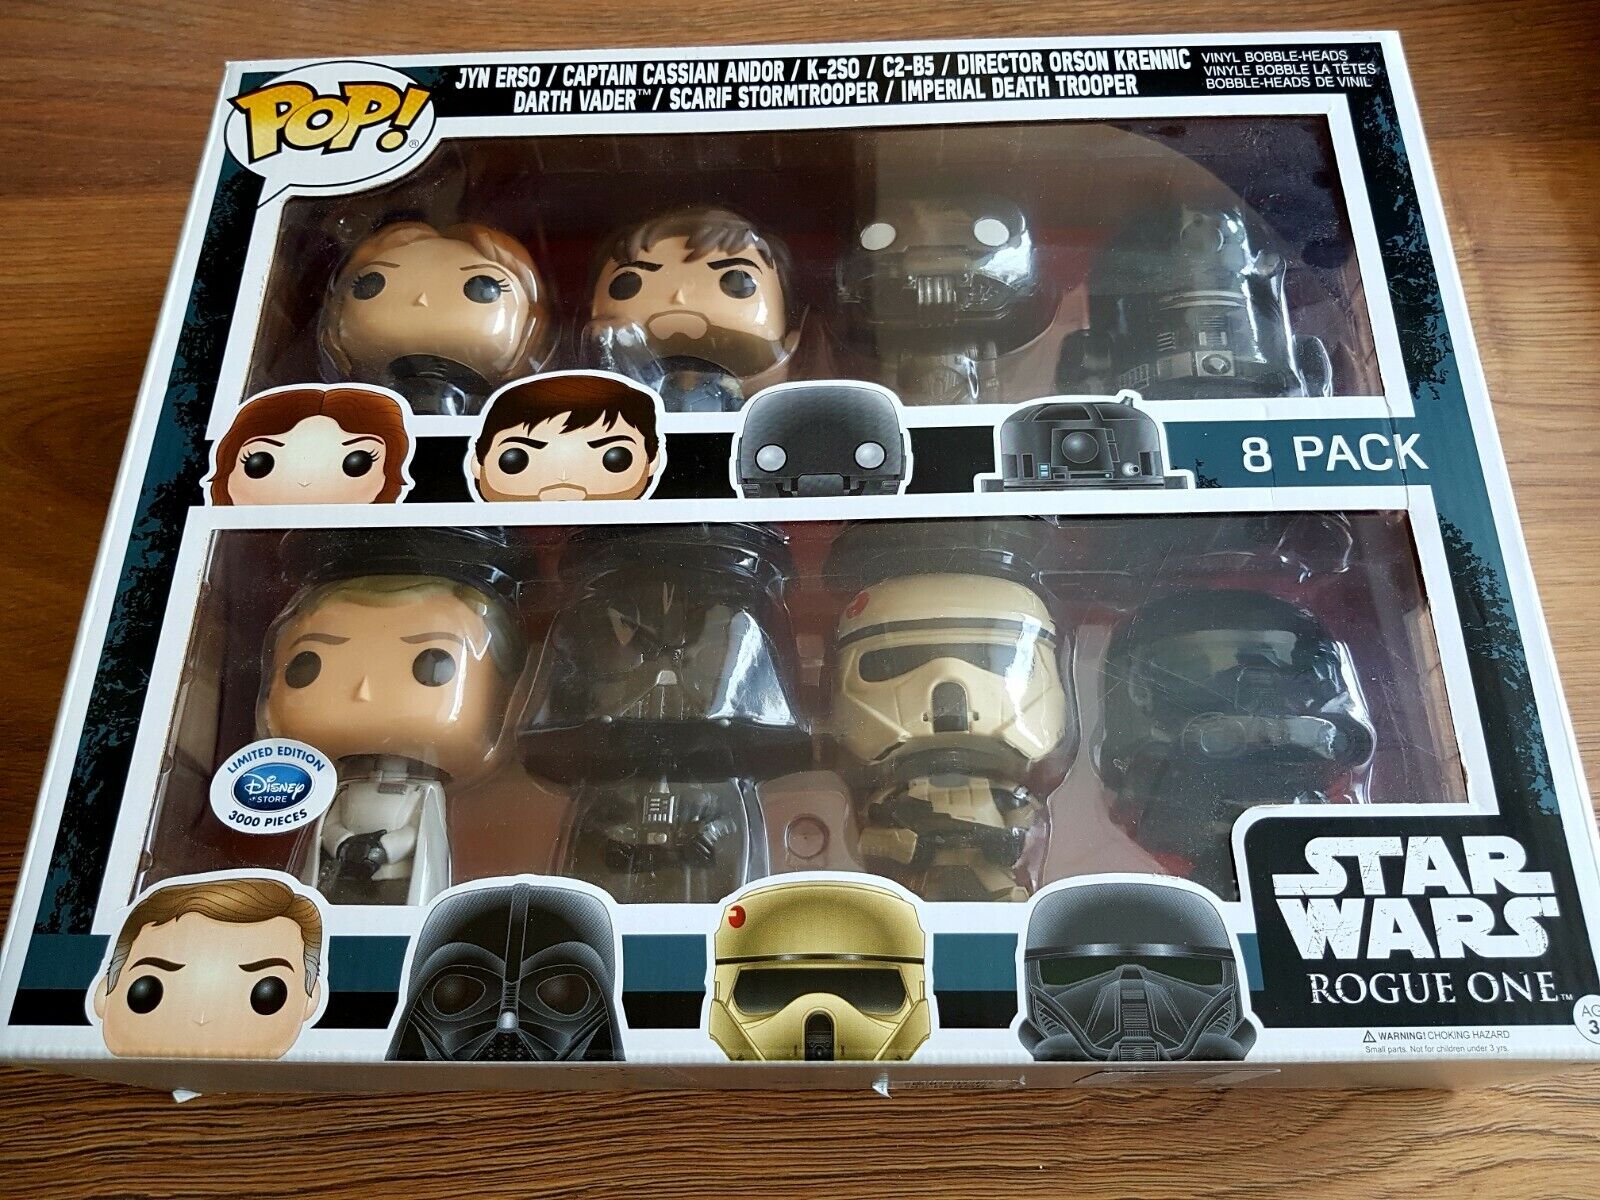 Funko Pop! Star Wars 8 pack Disney Store Exclusive Rare 3000 Pieces Vaulted